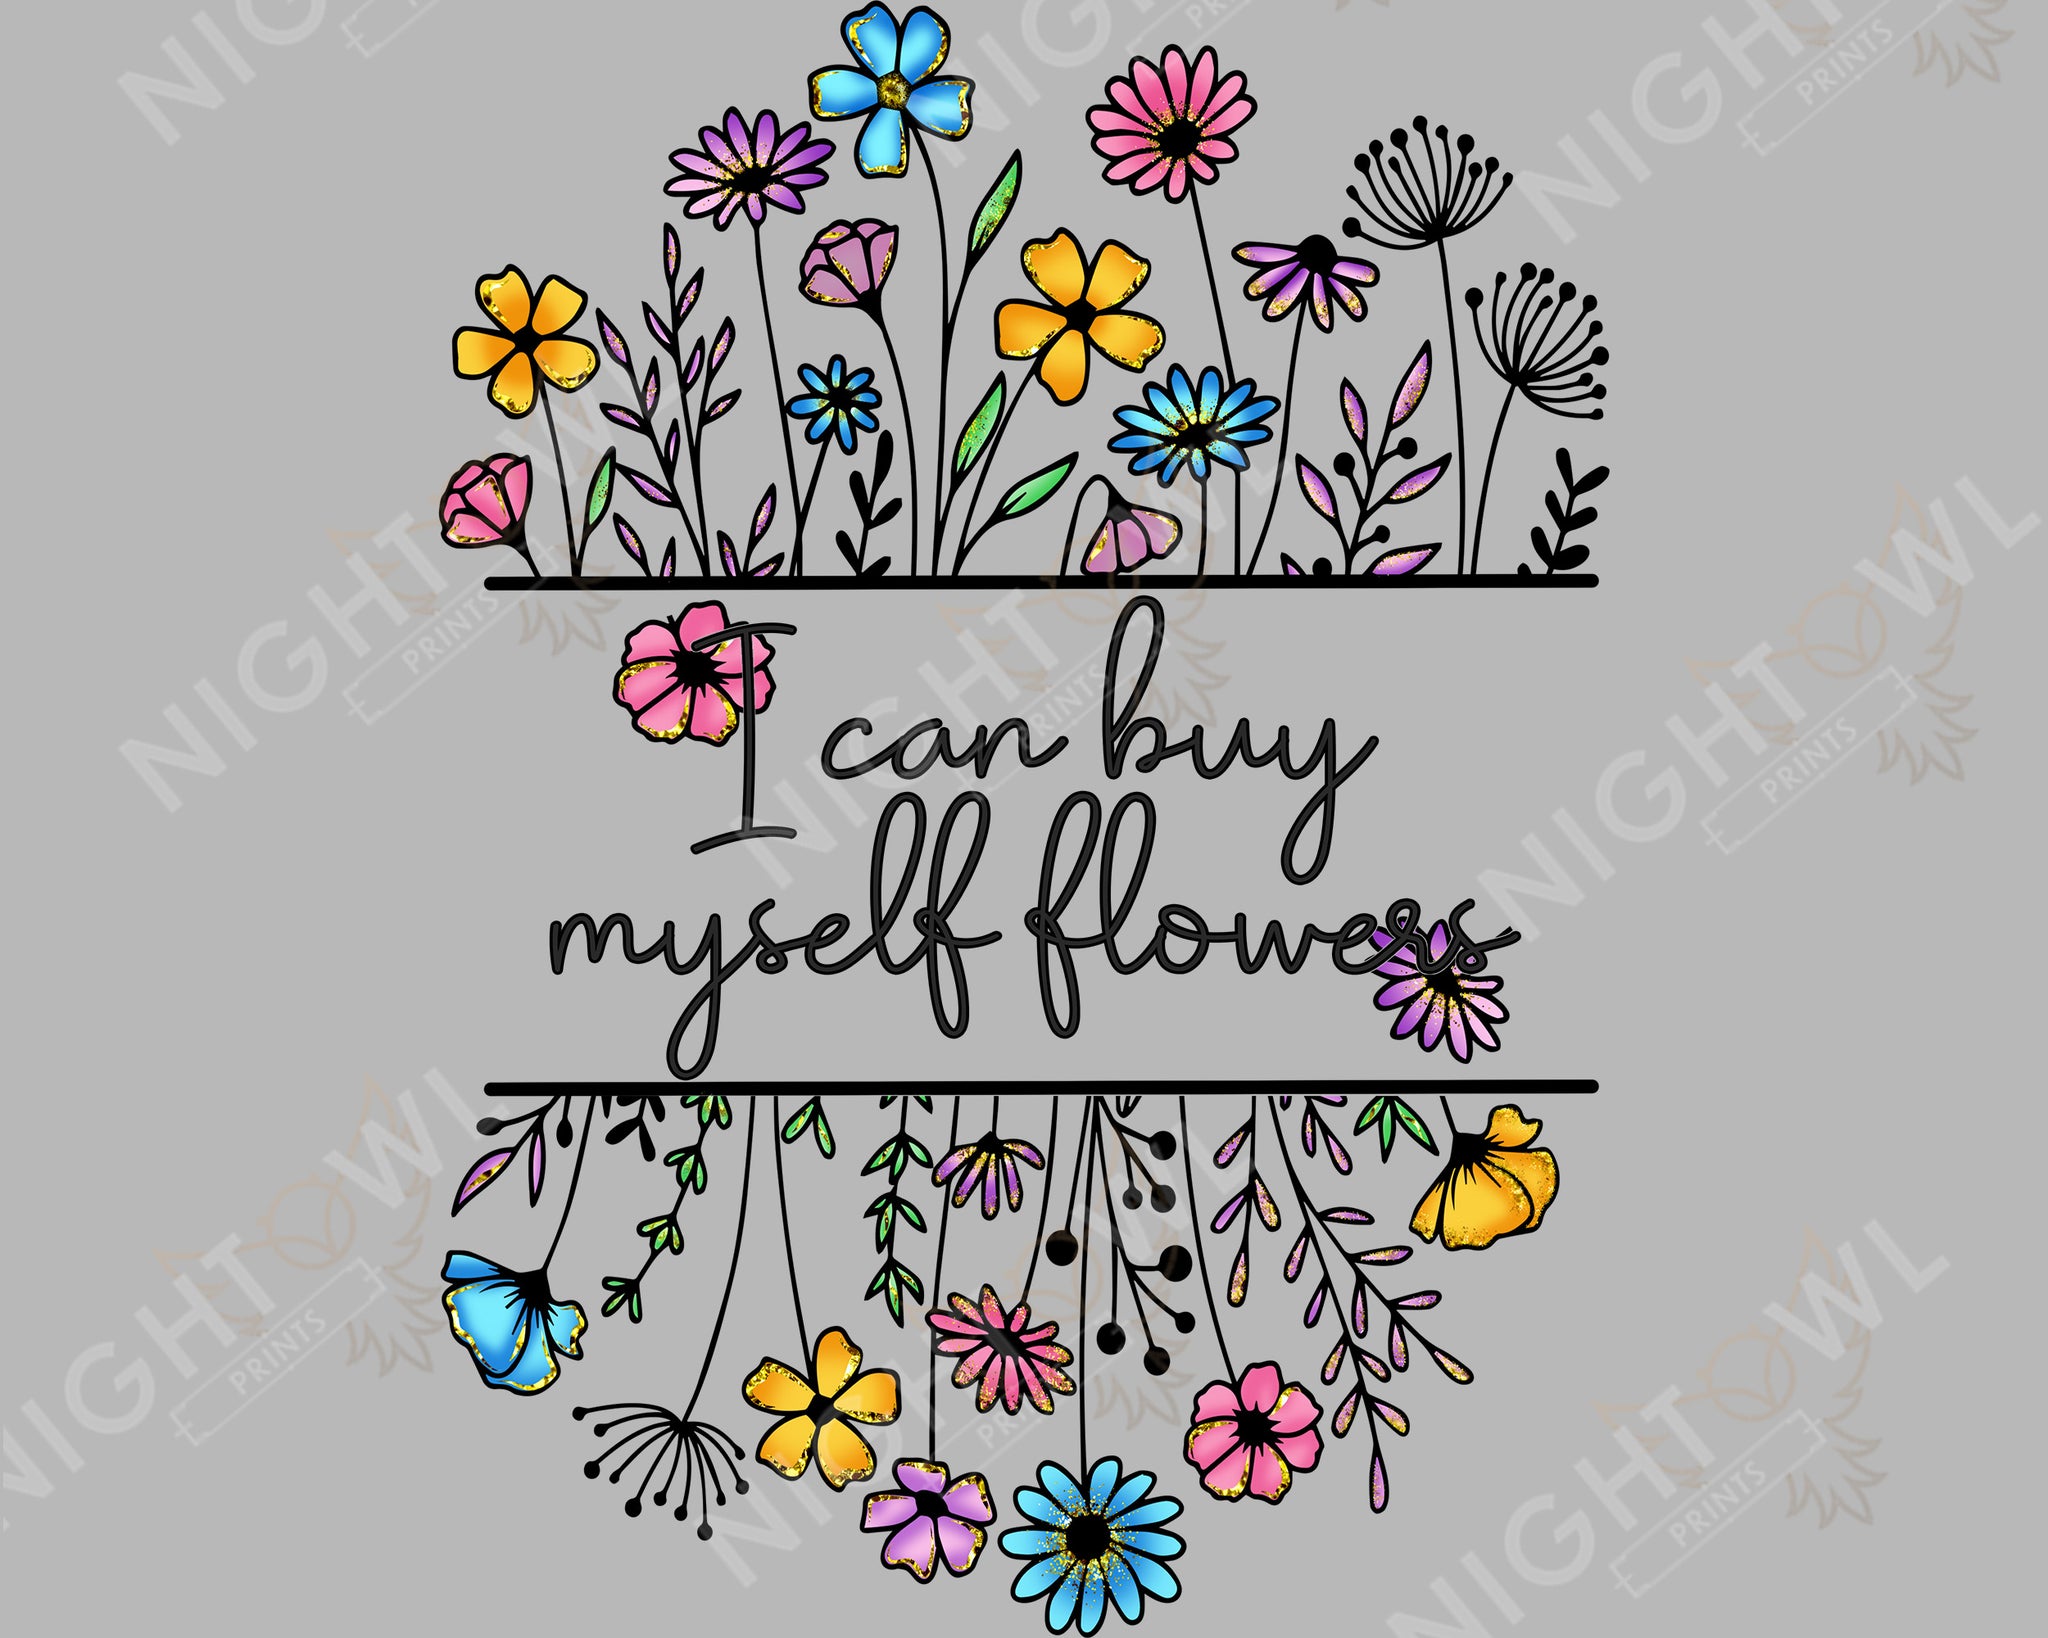 Digital Download file PNG. I can buy myself flowers bloom face. 300 DPI.  Print ready file.